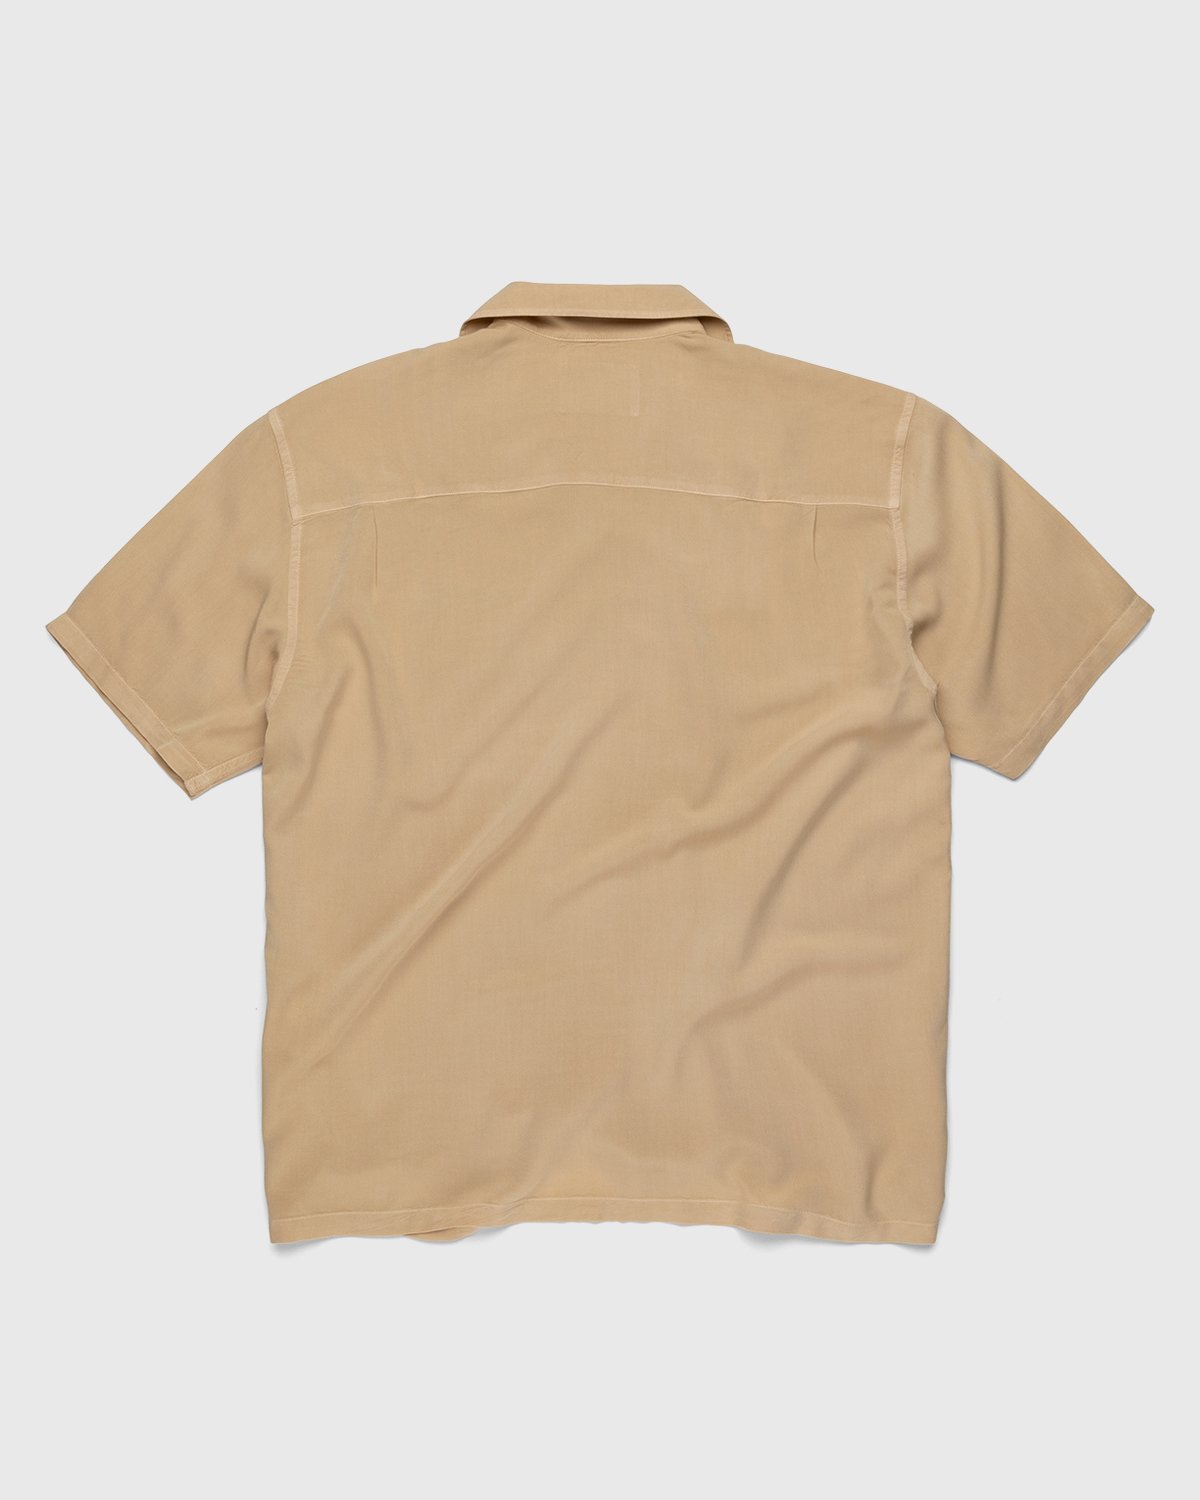 Highsnobiety - Bowling Shirt Beige - Clothing - Brown - Image 2